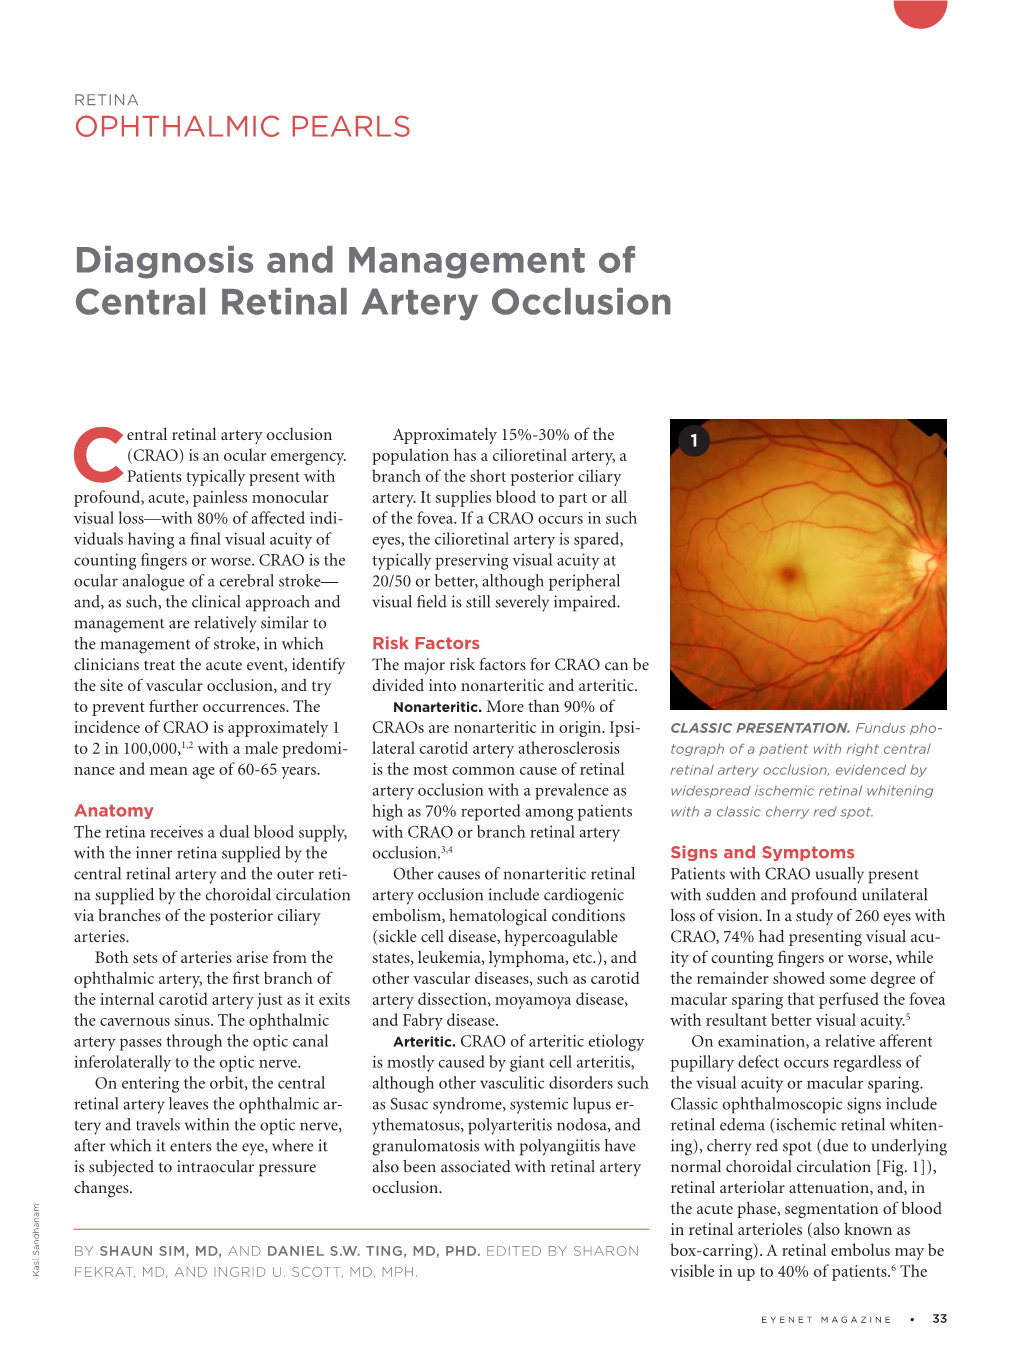 Diagnosis and Management of Central Retinal Artery Occlusion